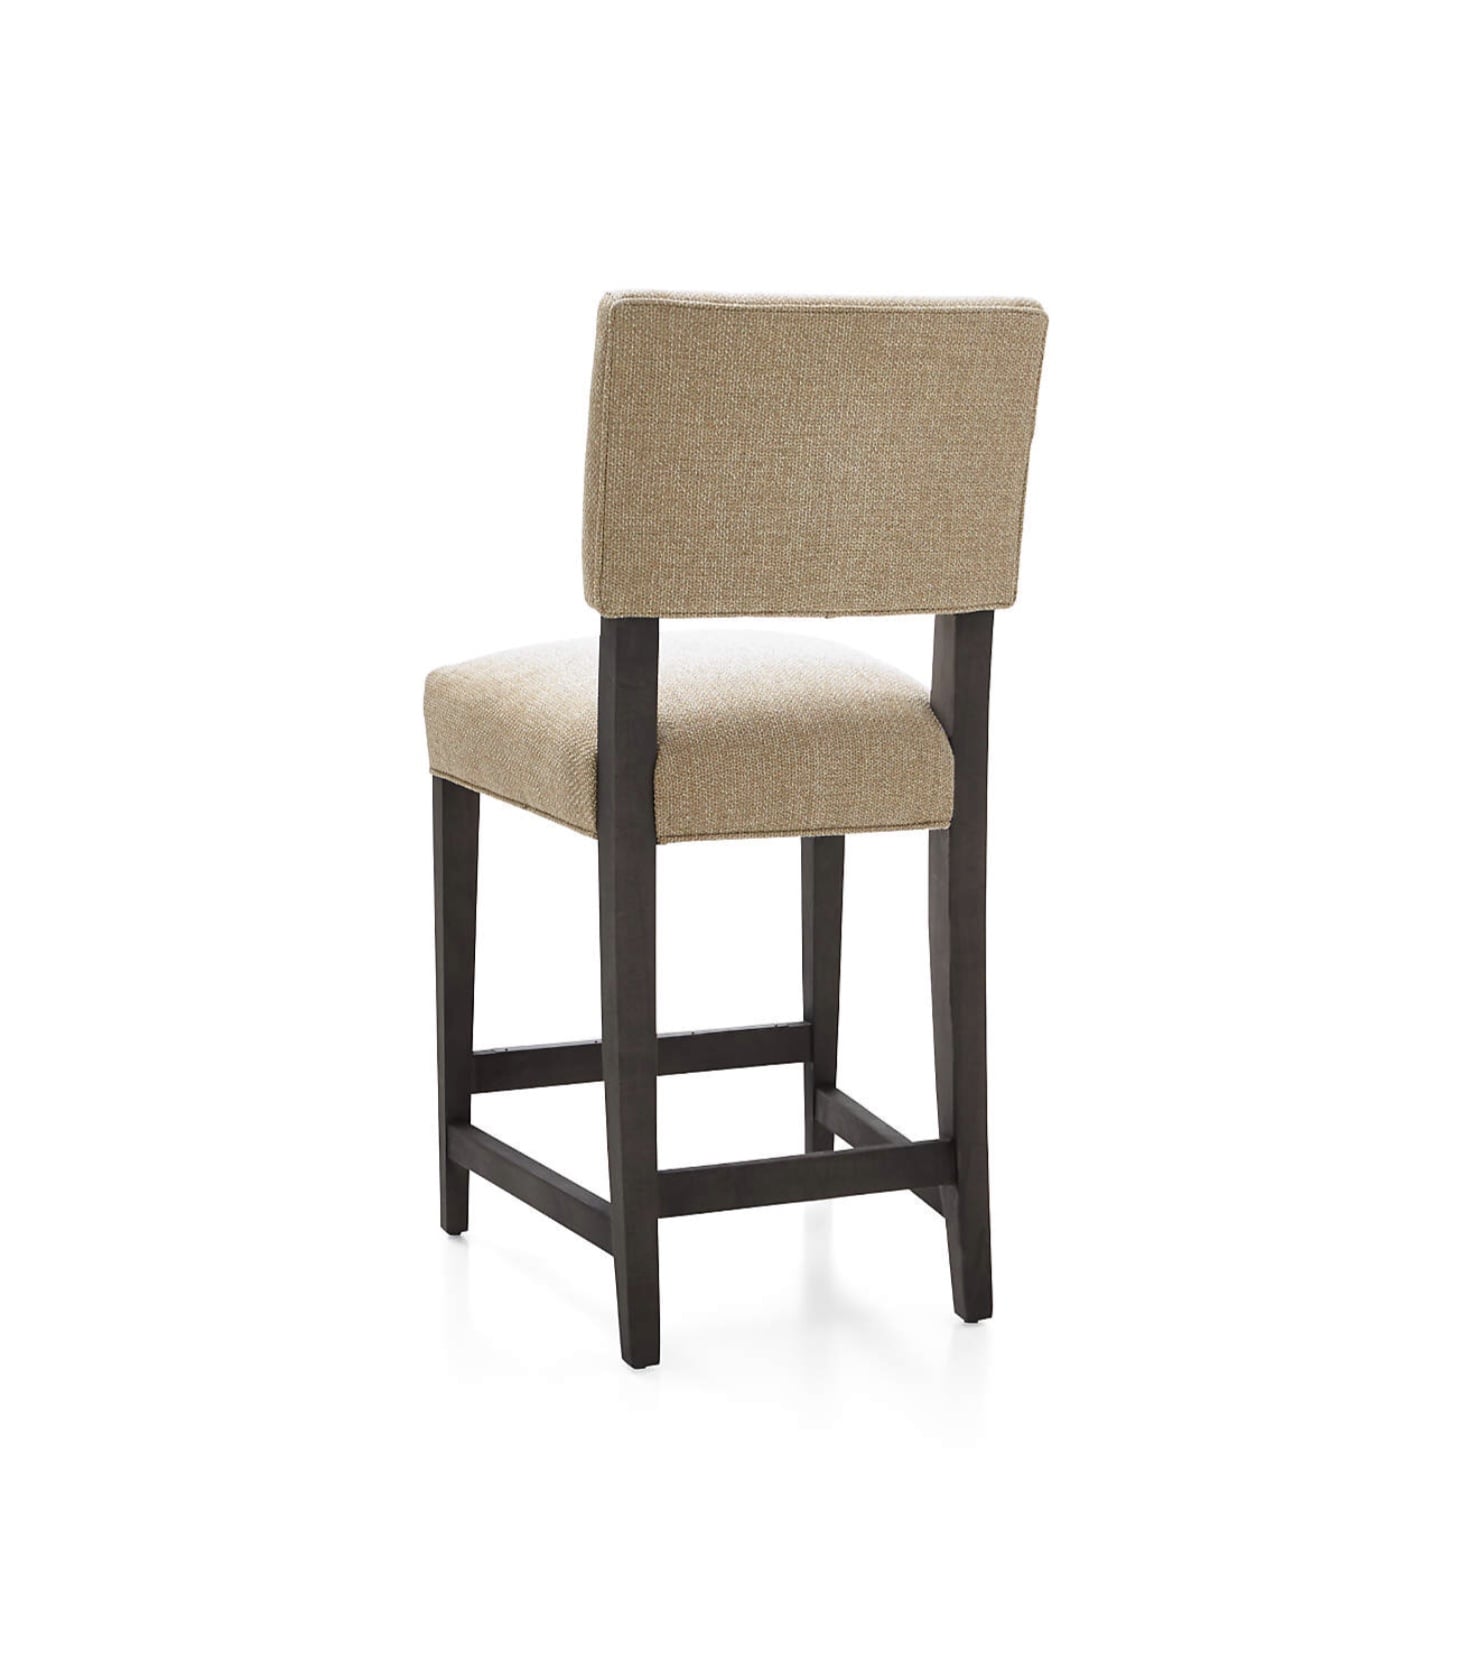 Made to Order Bar Stools Furniture. - BST 060-01